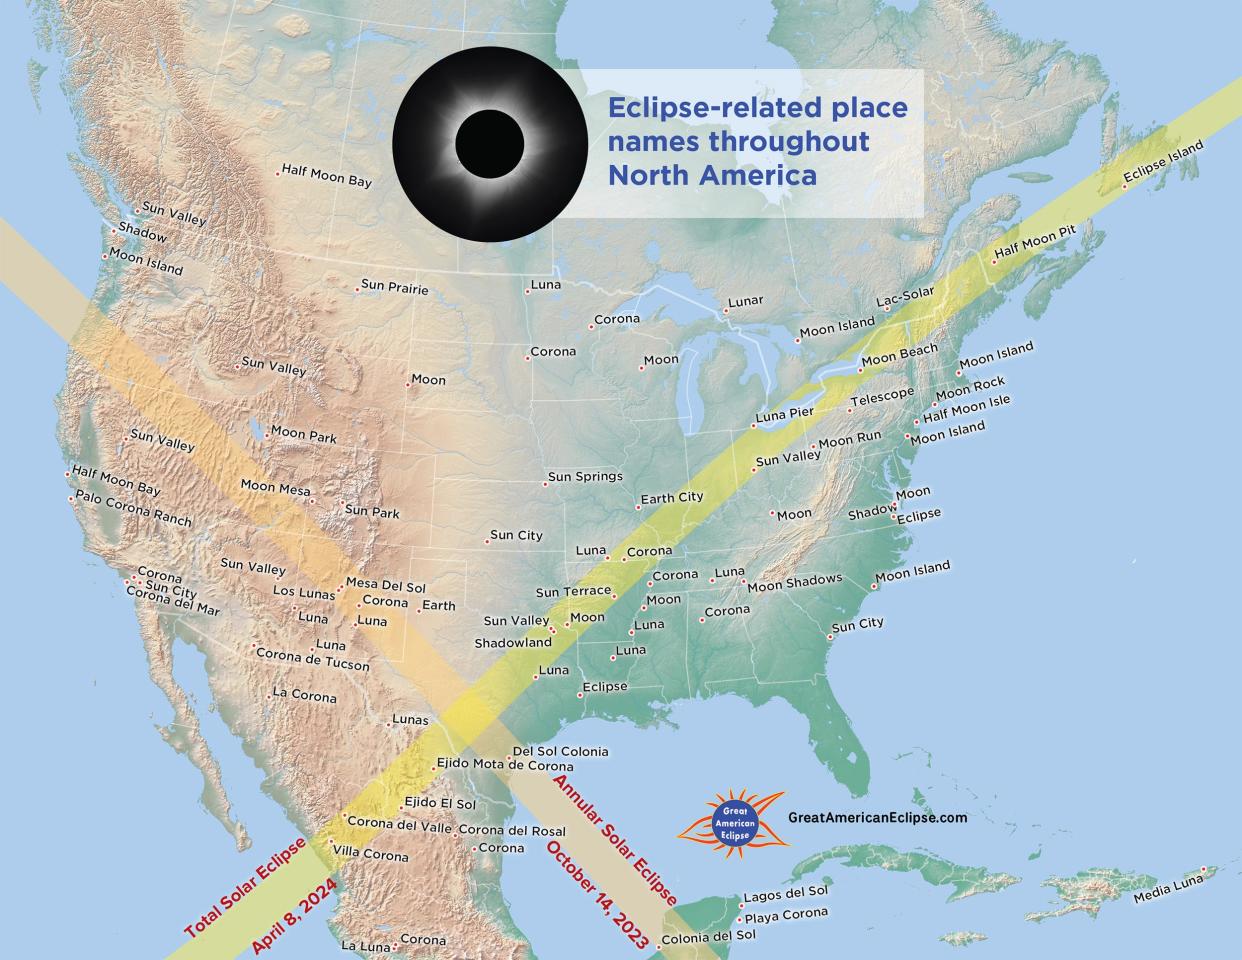 Eclipse cartographer Michael Zeiler at GreatAmericanEclipse.com put together this map showing places he discovered on or near the April 8 path of totality that seem to be appropriately-named.